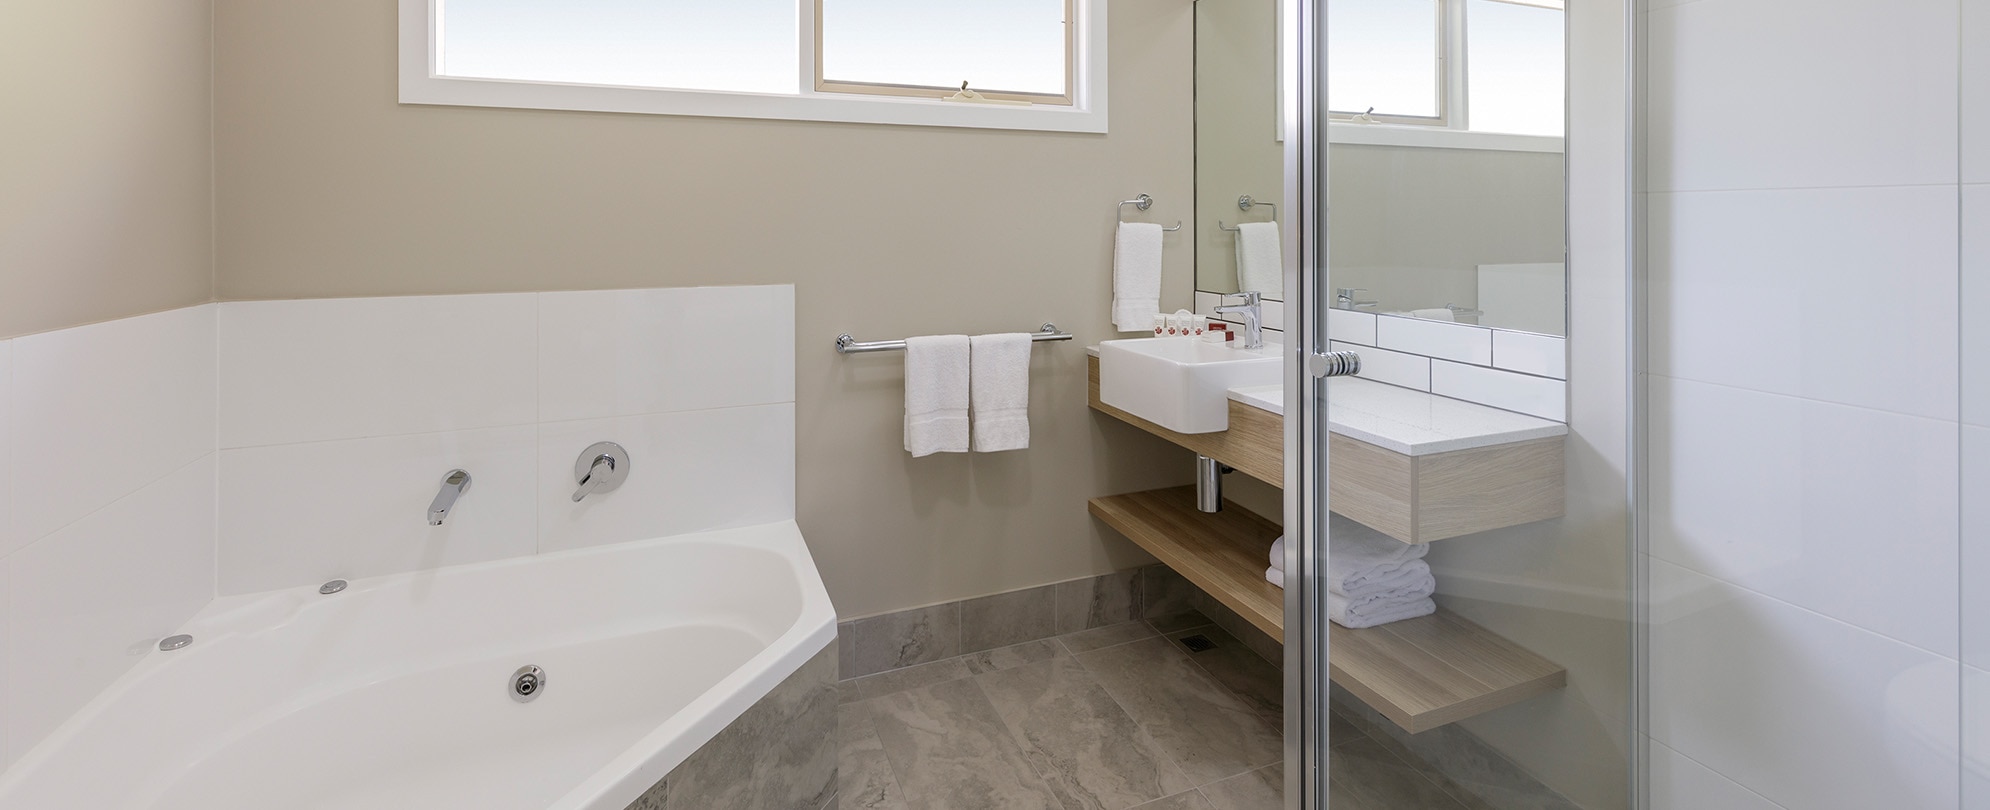 A soaking tub, glass shower, and a vanity sink and mirror in the bathroom of a Club Wyndham Phillip Island studio suite.